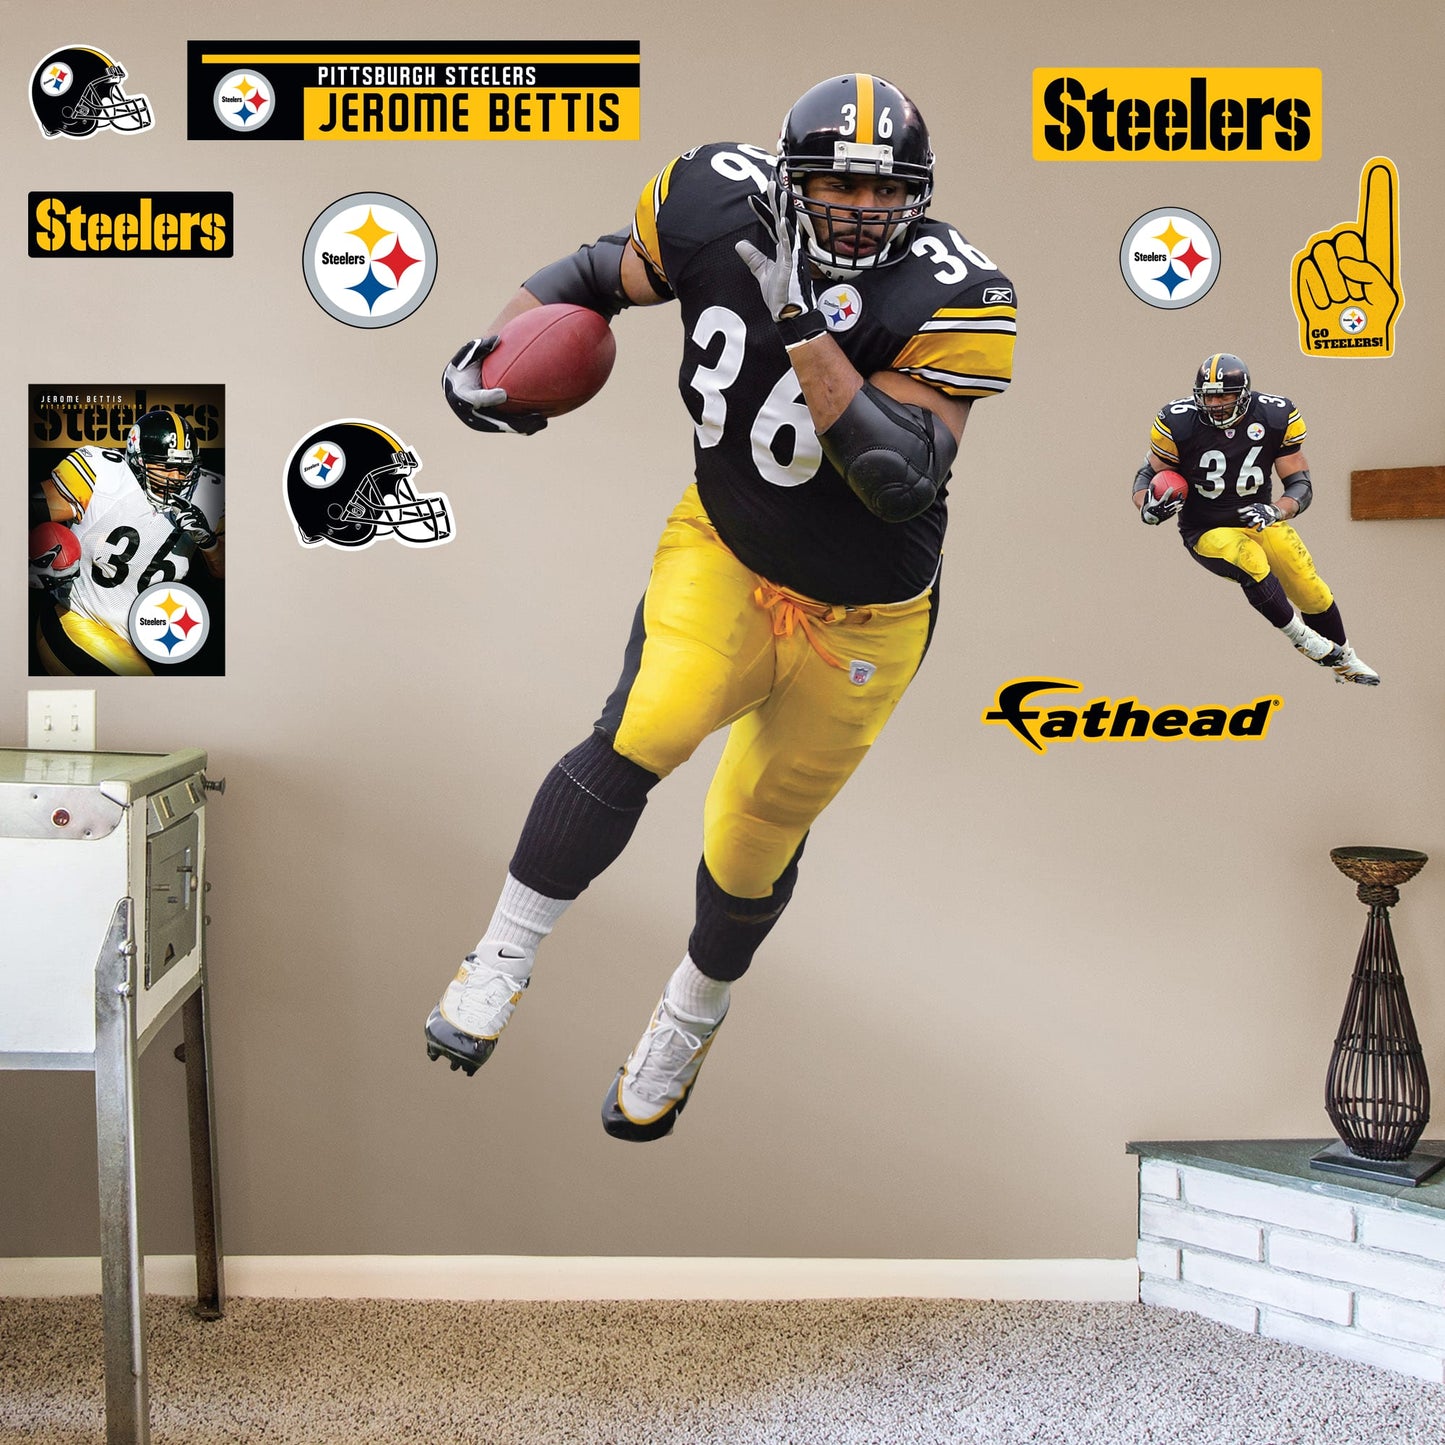 Pittsburgh Steelers: Jerome Bettis Legend       - Officially Licensed NFL Removable Wall   Adhesive Decal